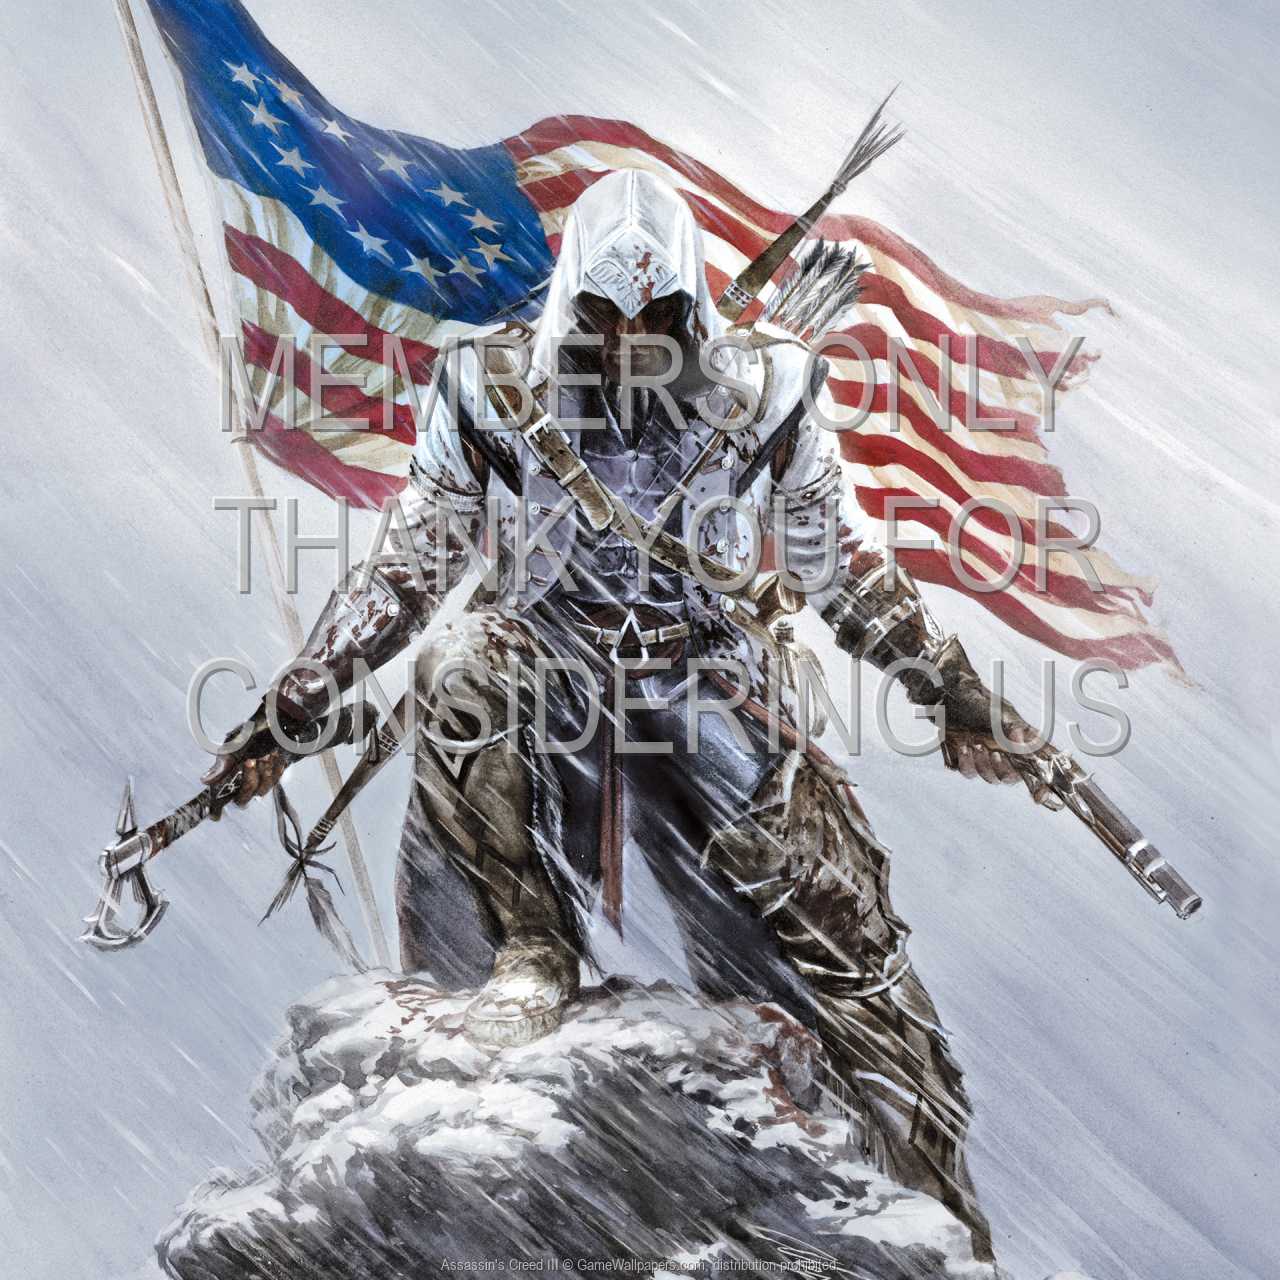 Assassin's Creed III 720p Horizontal Mobile wallpaper or background 26